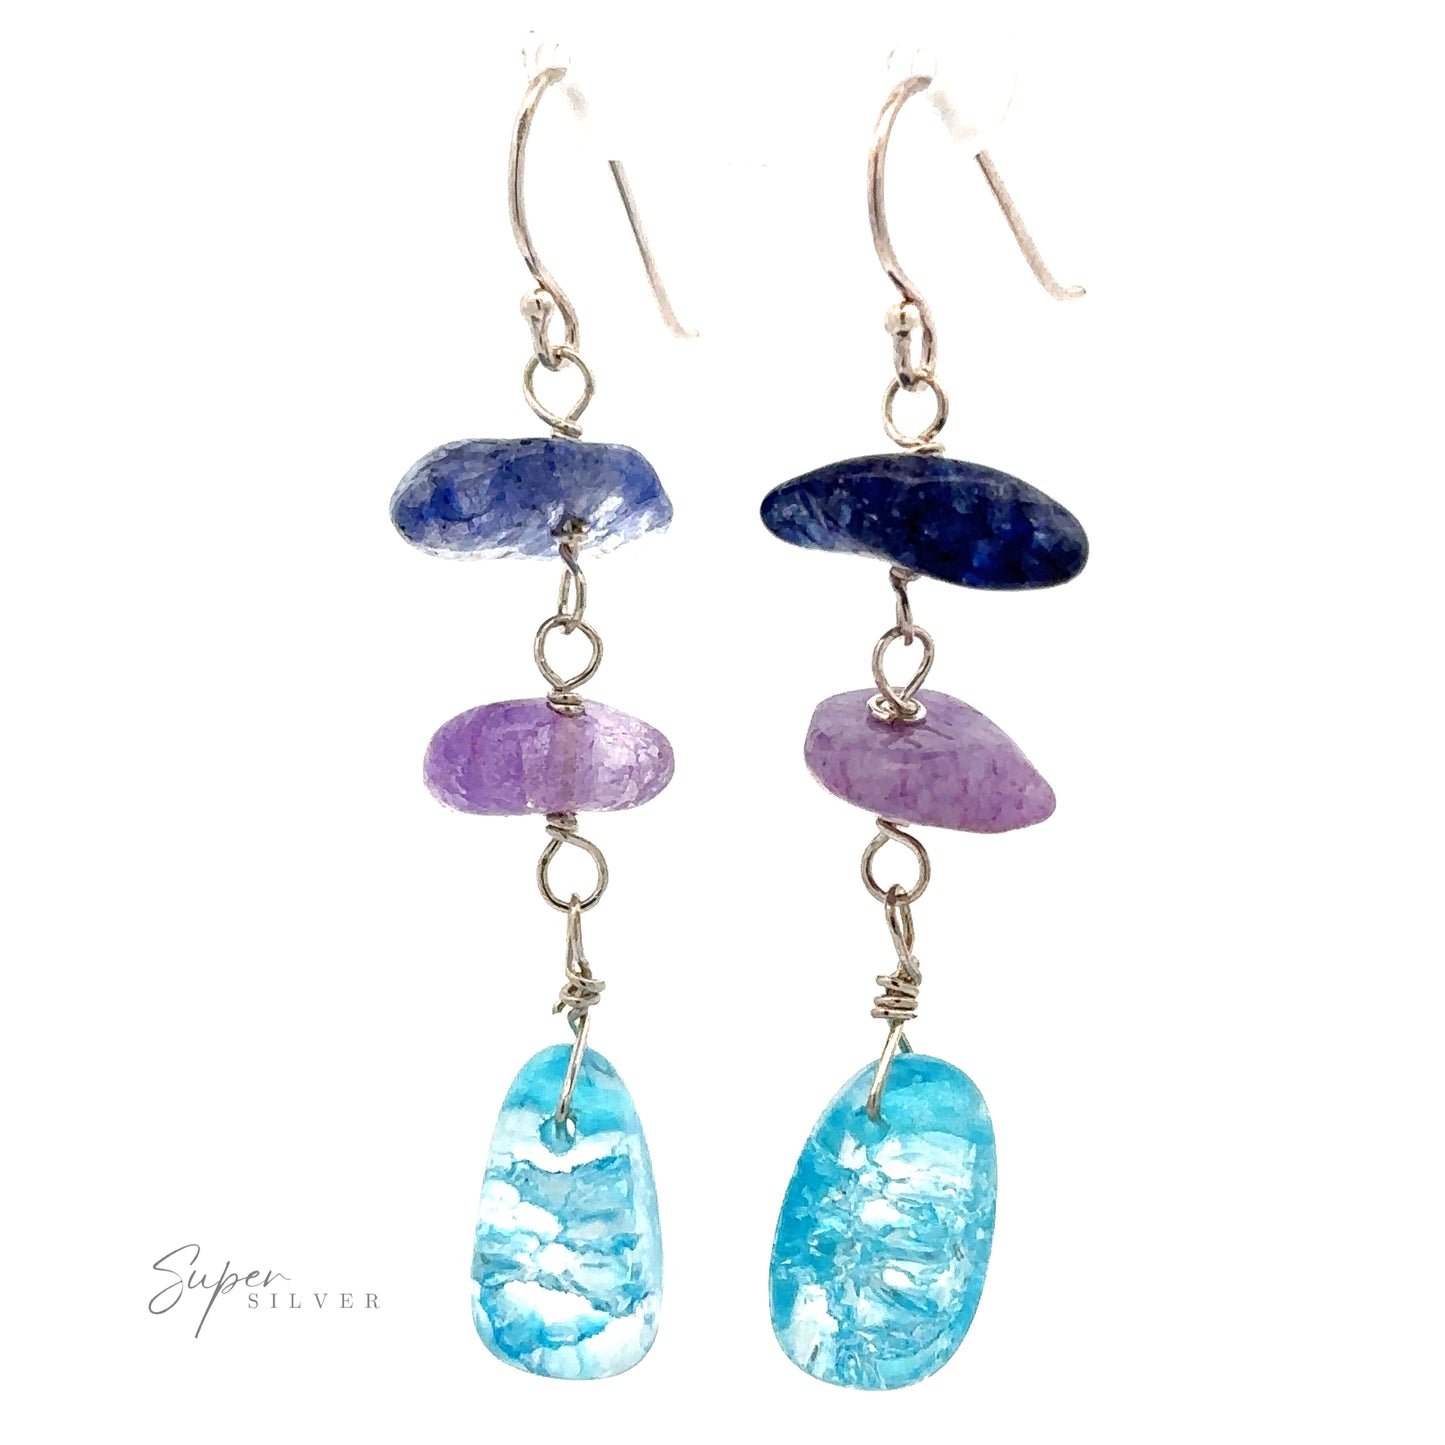 
                  
                    A pair of Beaded Blue and Purple Earrings featuring three stacked stones each: one bright blue bead, one purple bead, and one turquoise stone. The logo "Super Silver" is visible at the bottom left.
                  
                